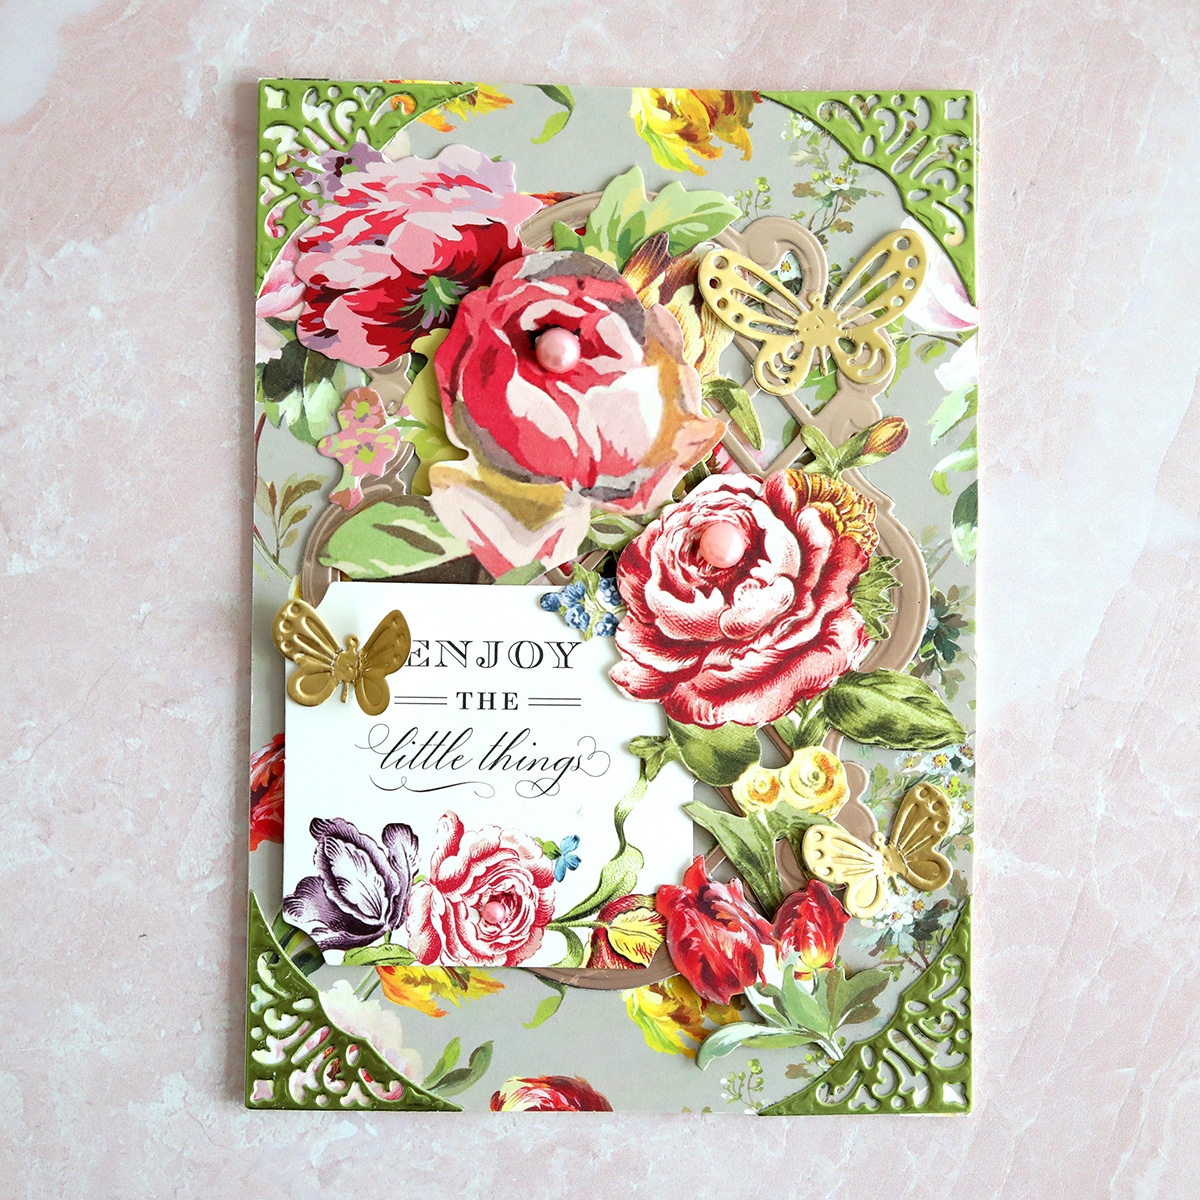 A card with flowers and butterflies on it.